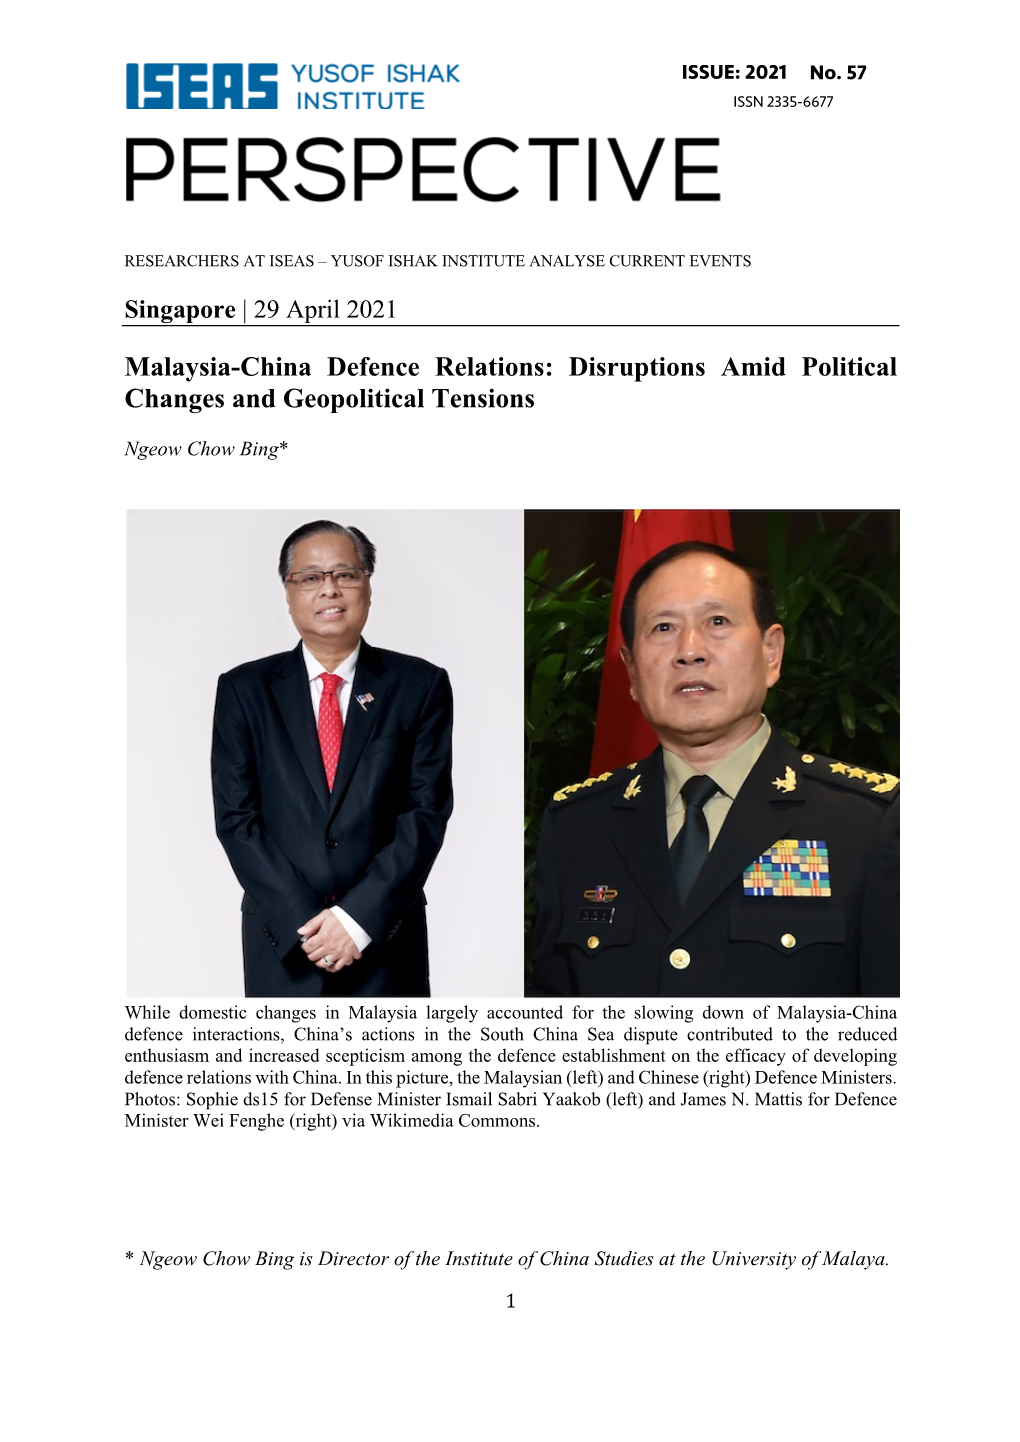 Malaysia-China Defence Relations: Disruptions Amid Political Changes and Geopolitical Tensions